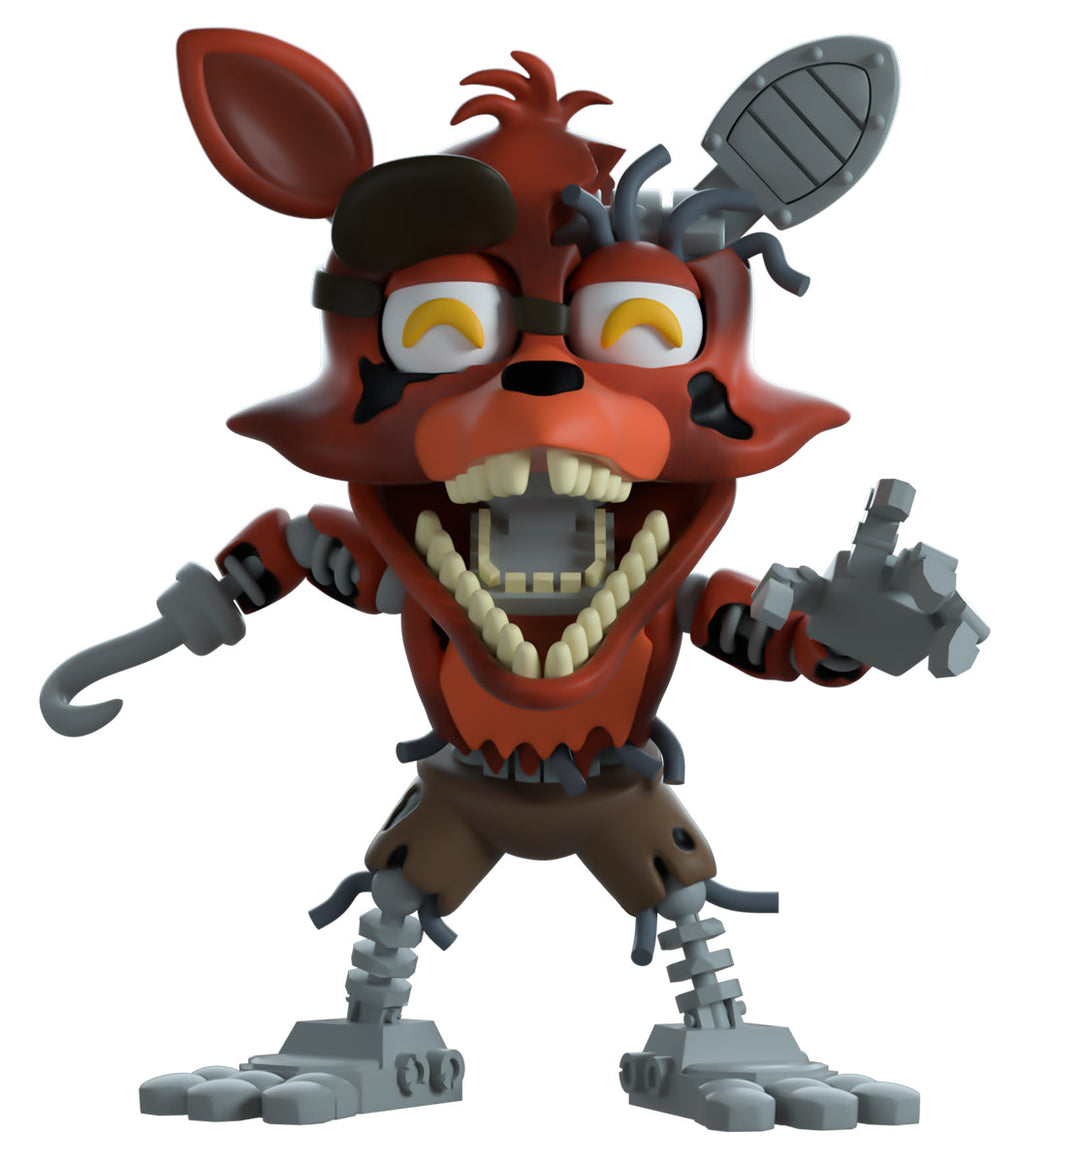 Youtooz : Five Nights at Freddy's - Withered Foxy #43 (Pre Order)